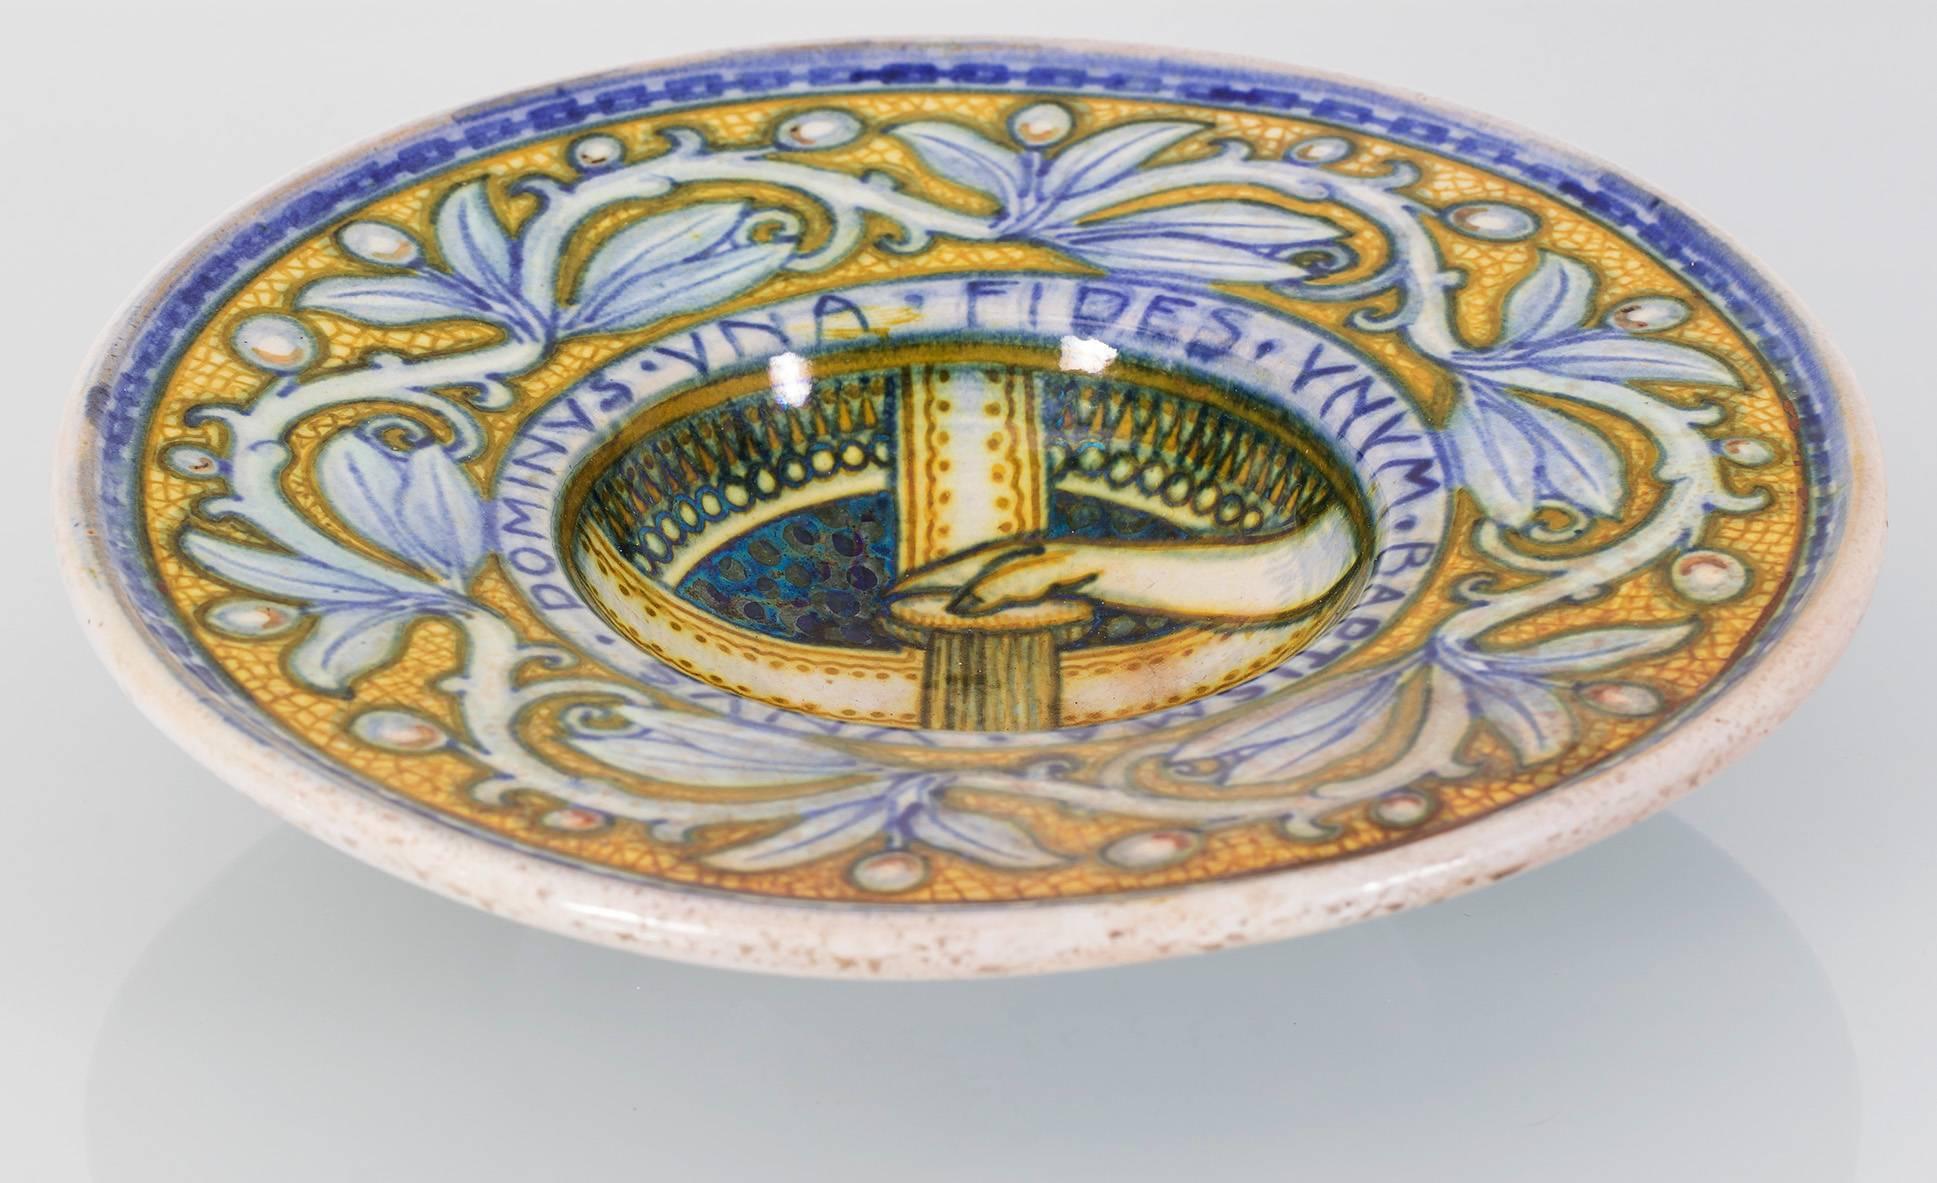 A beautiful example of Italian Liberty style. A 1910s lusterware ceramic dish with St. John the Baptist theme decoration created by Galileo Chini and manufactured by Fornaci di San Lorenzo.

Marked on the bottom: Painted in blue, Chini & Co -